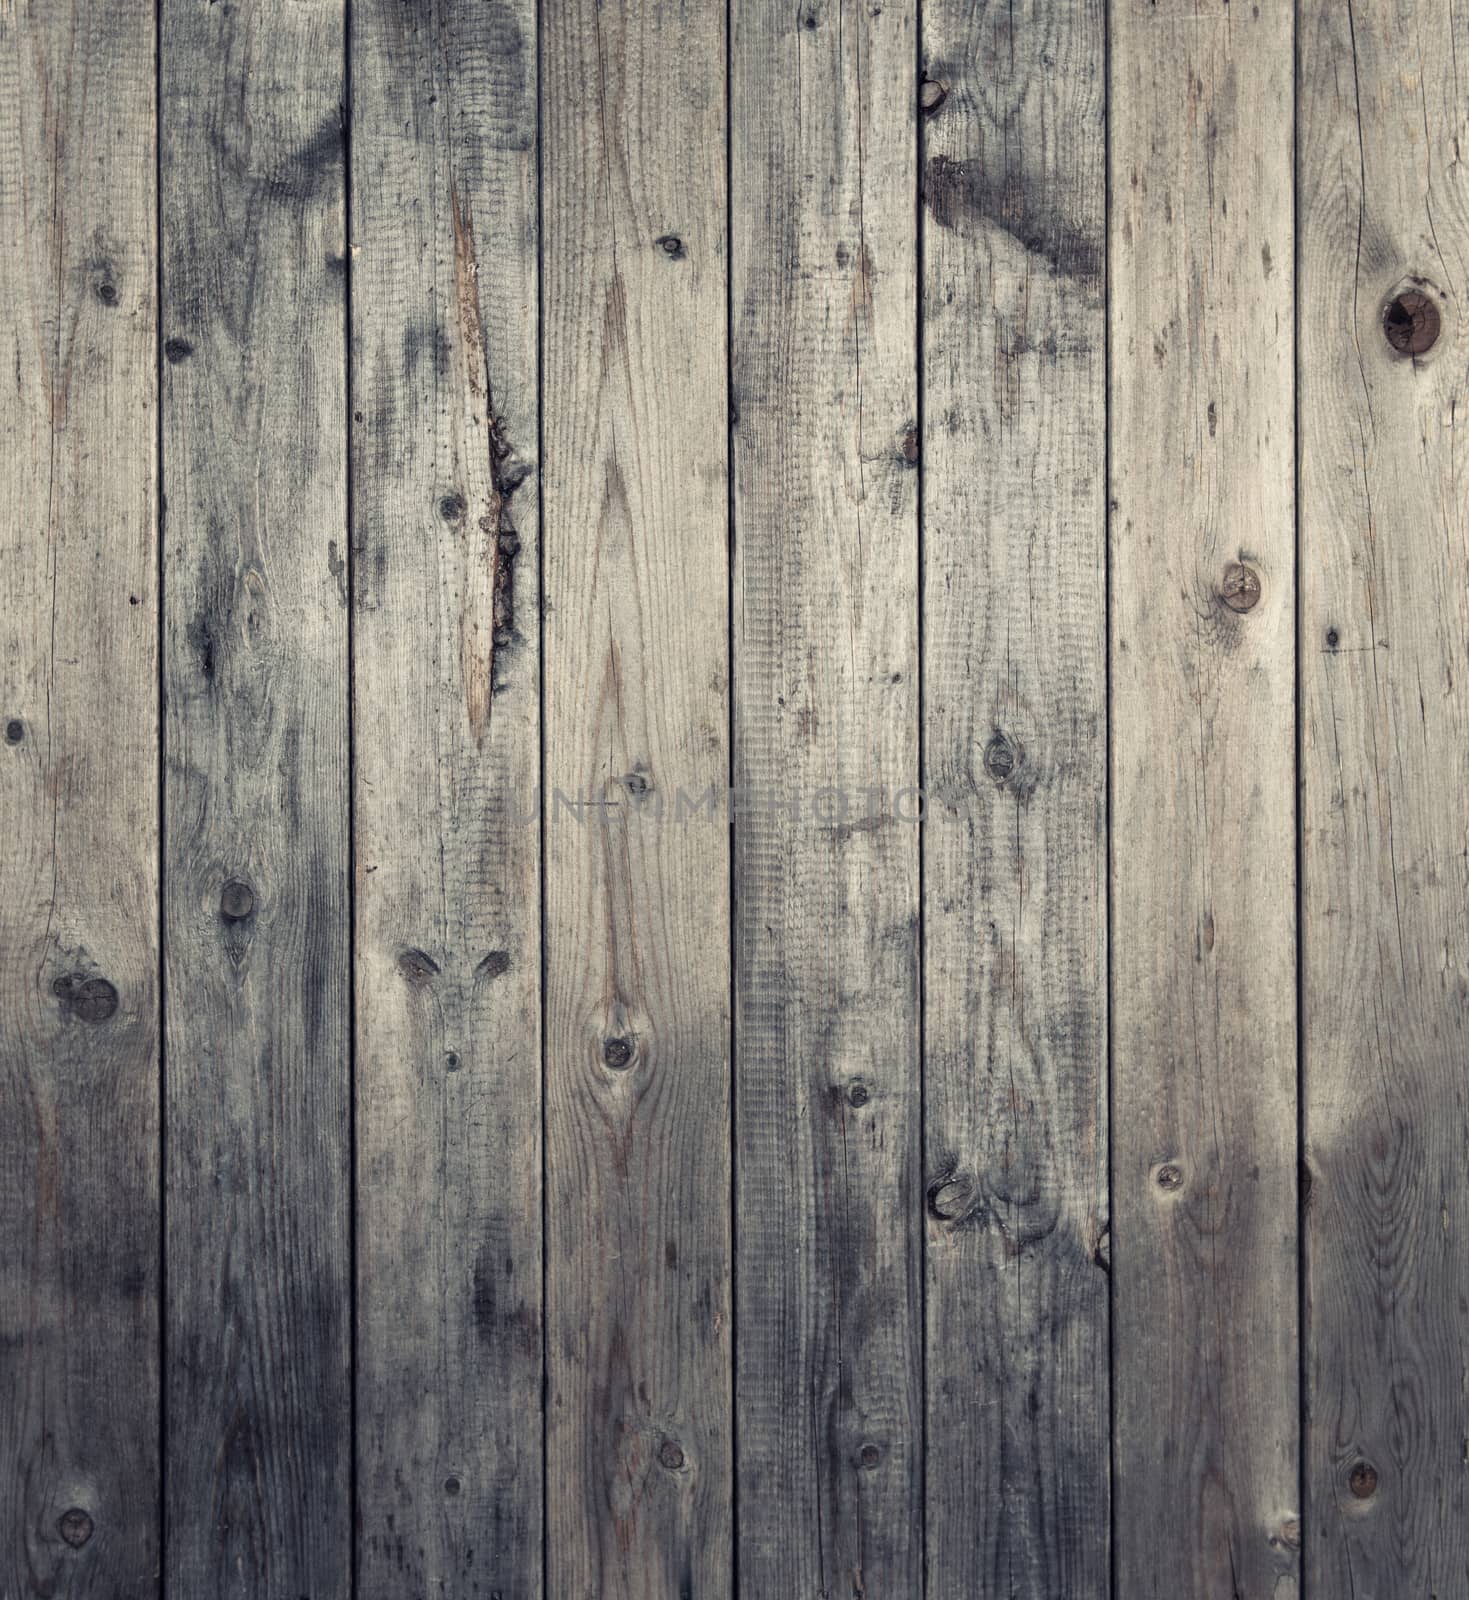 Grungy wooden background. Real seasoned wood.